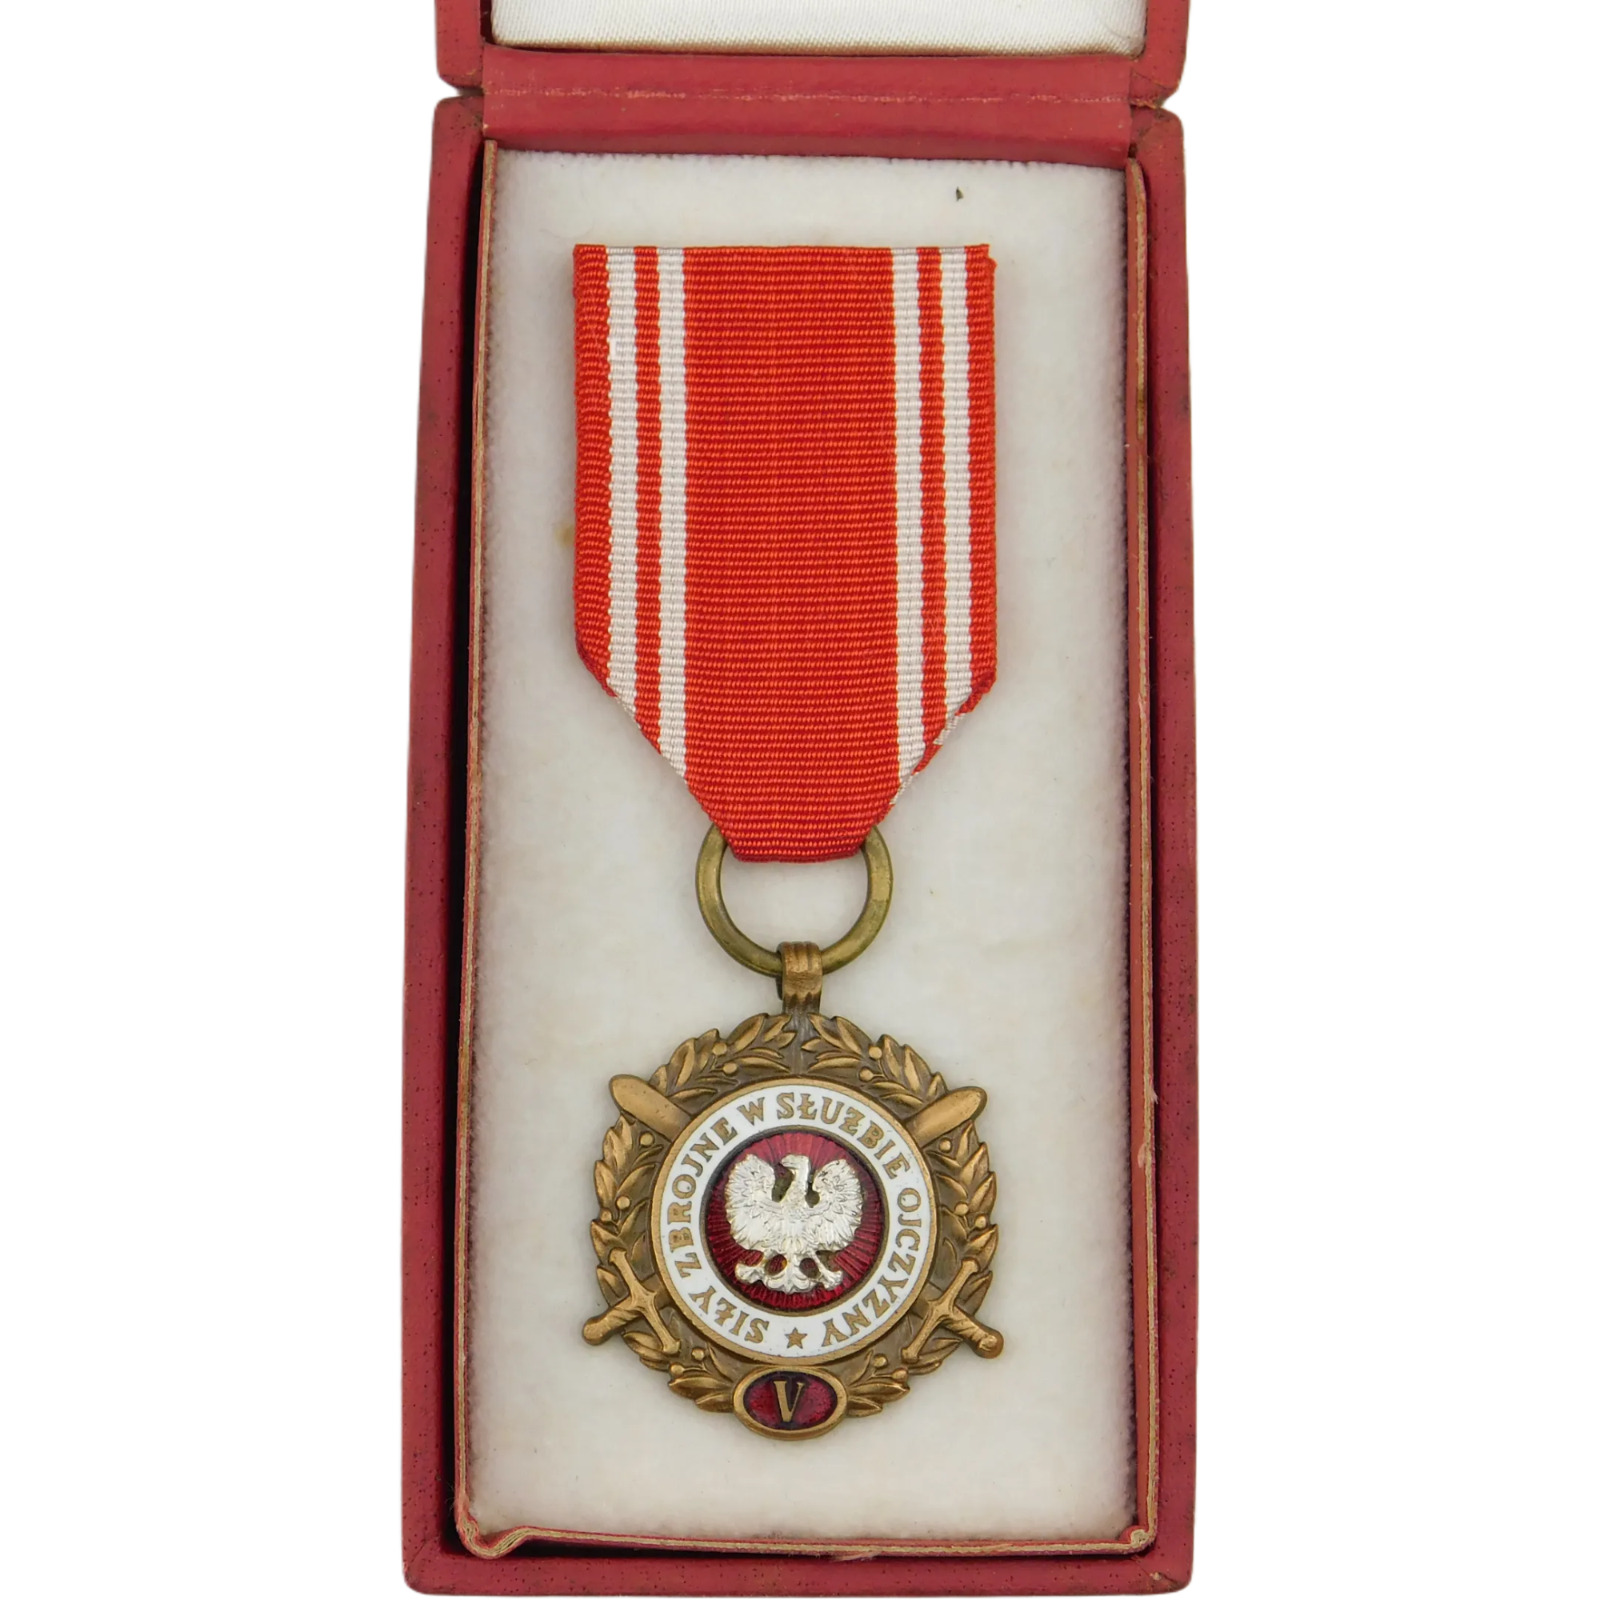 3115 WW2 POLISH MEDAL OF ARMED FORCES IN SERVICE OF MOTHERLAND 3RD CLASS POLAND